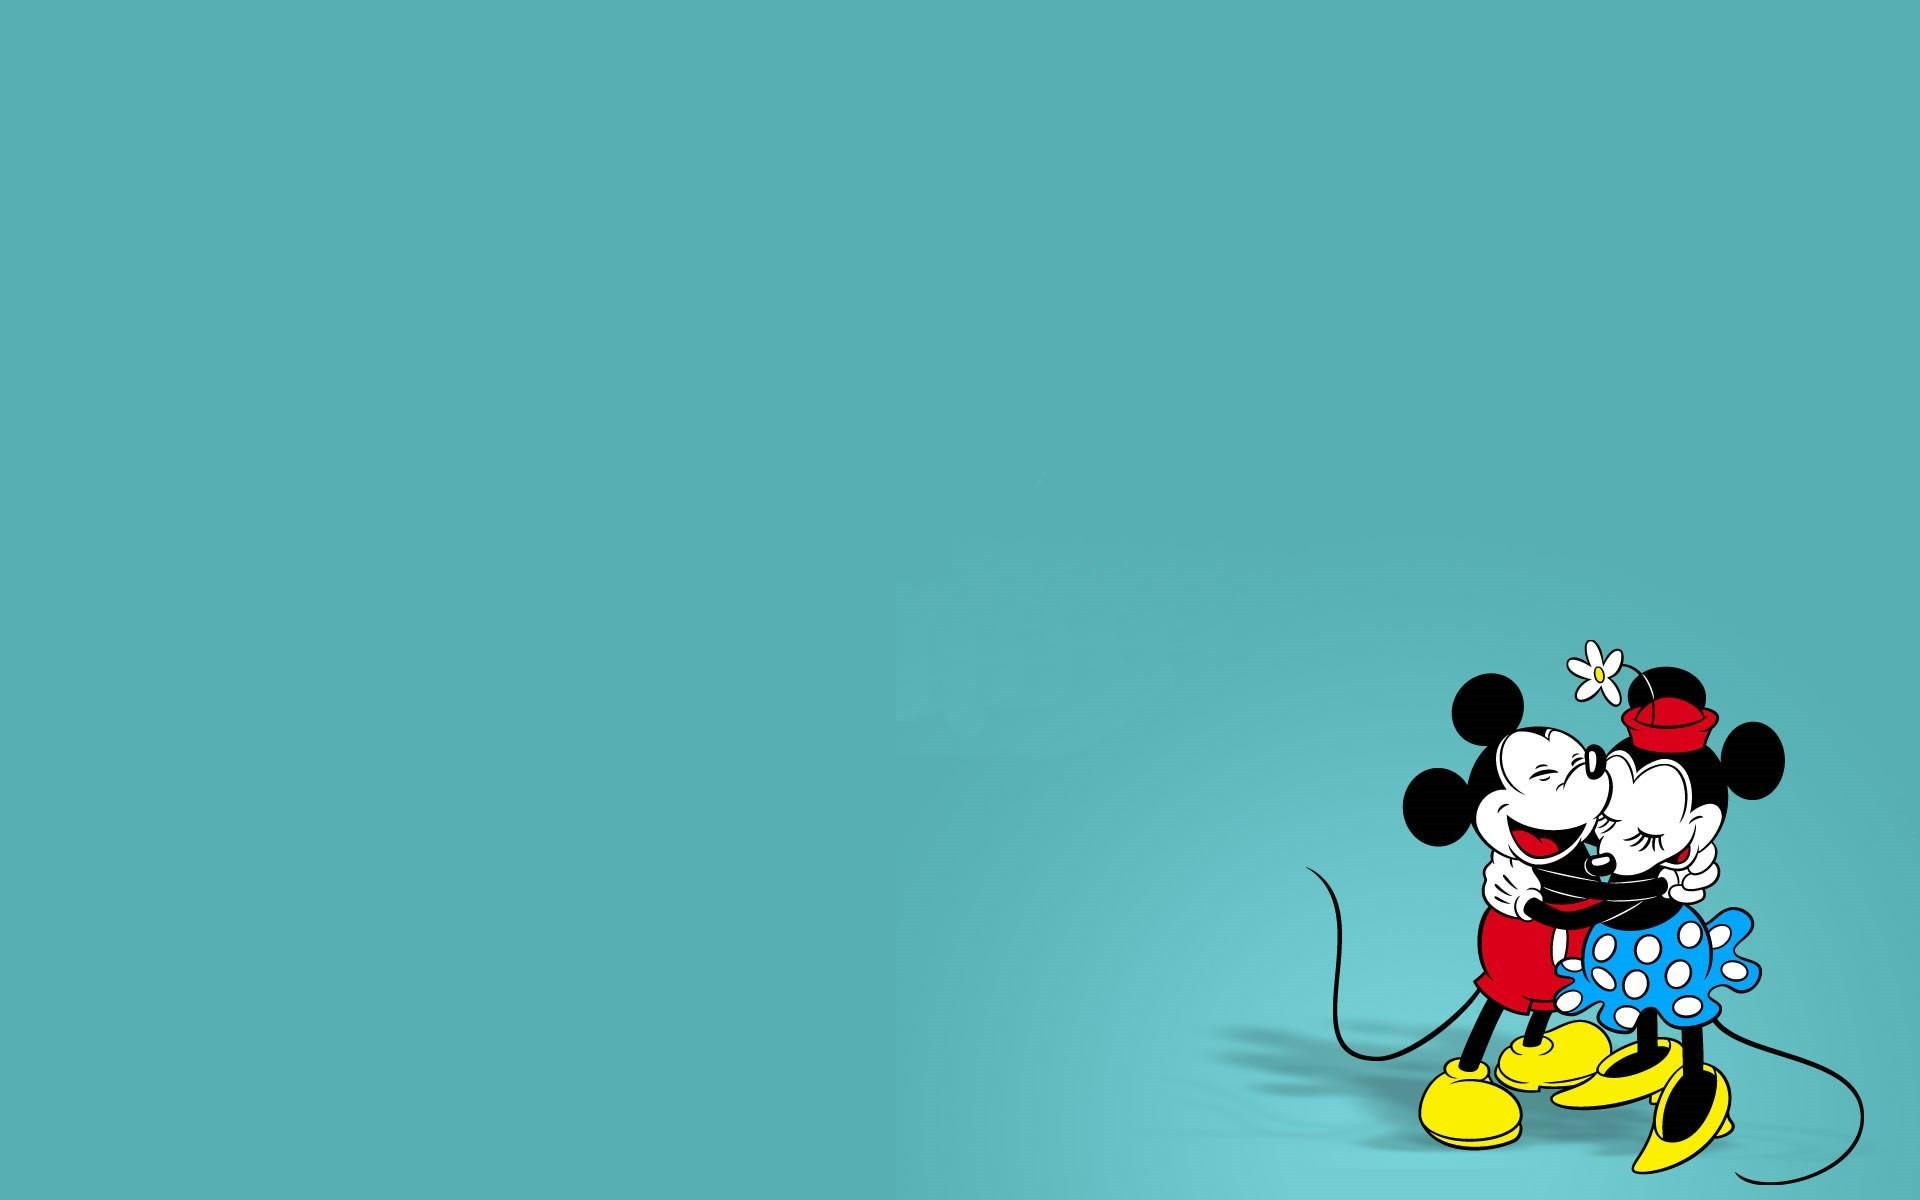 1920x1200 Mickey and minnie mouse cartoon wallpapers HD.